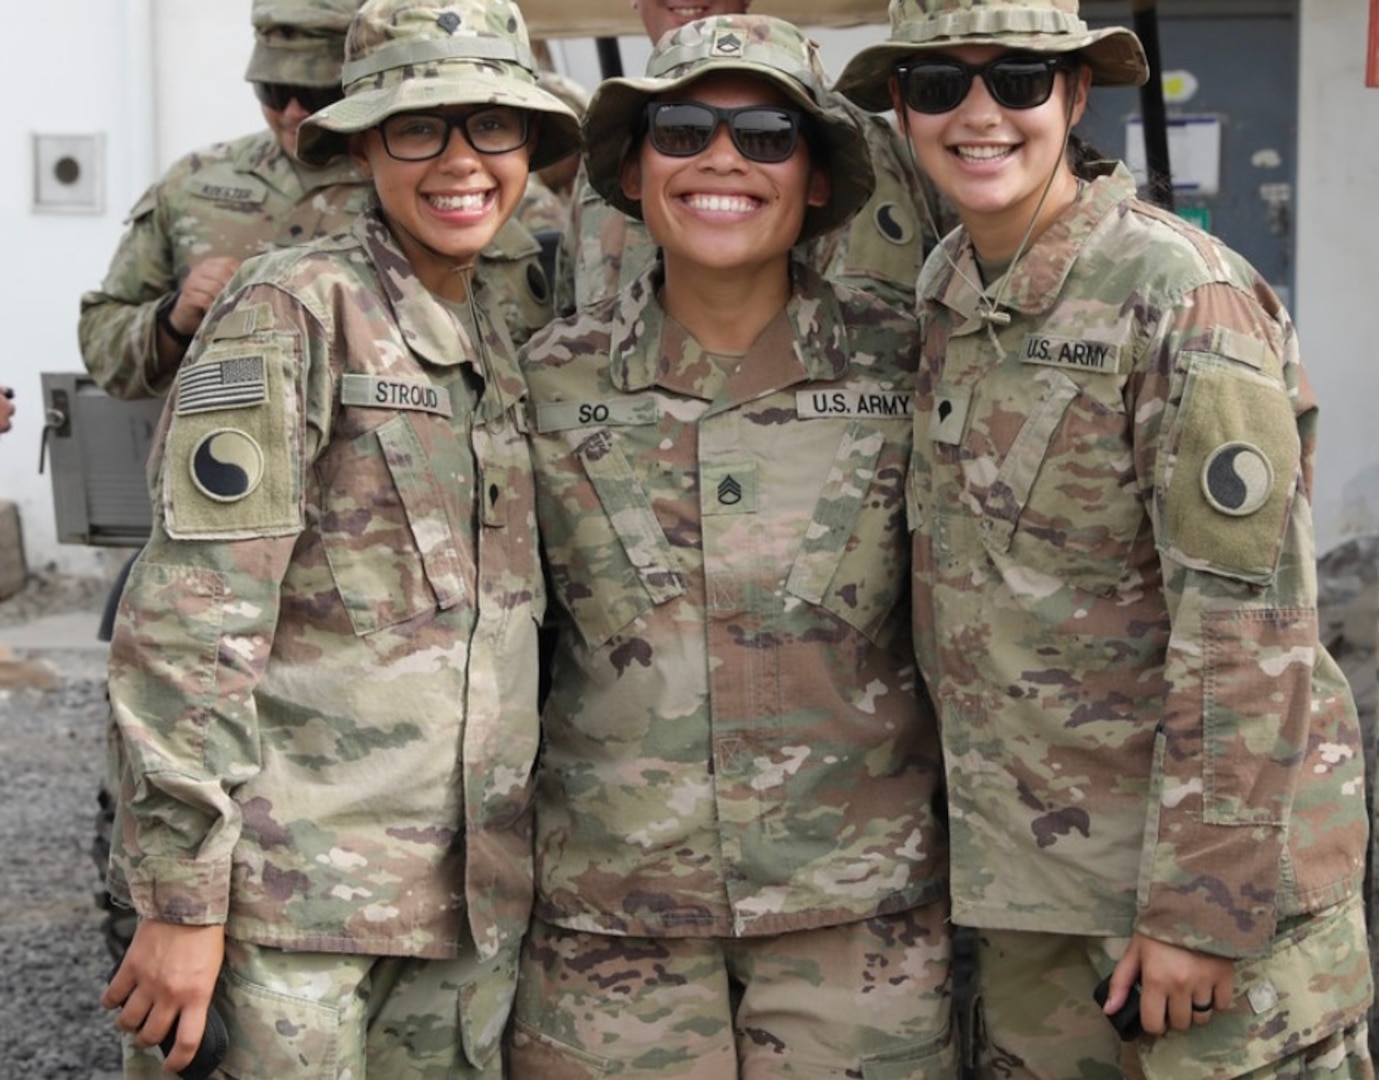 Three female Soldiers pose together.